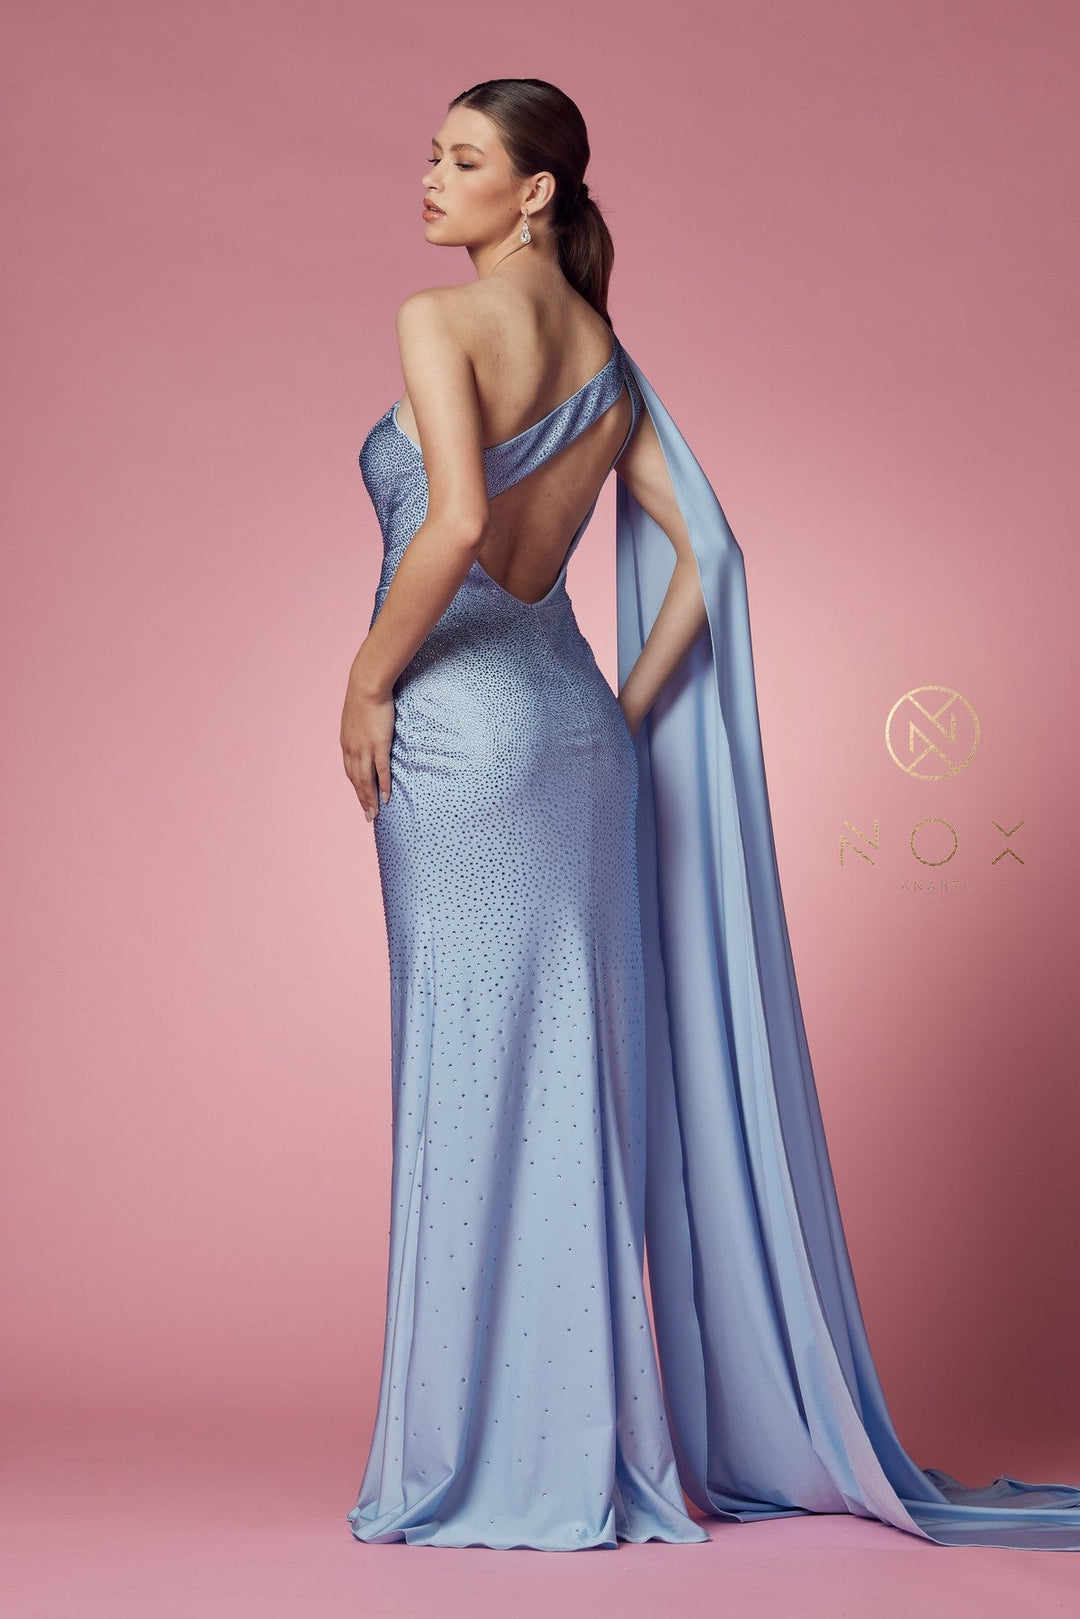 Fitted Long One Shoulder Dress by Nox Anabel E1039